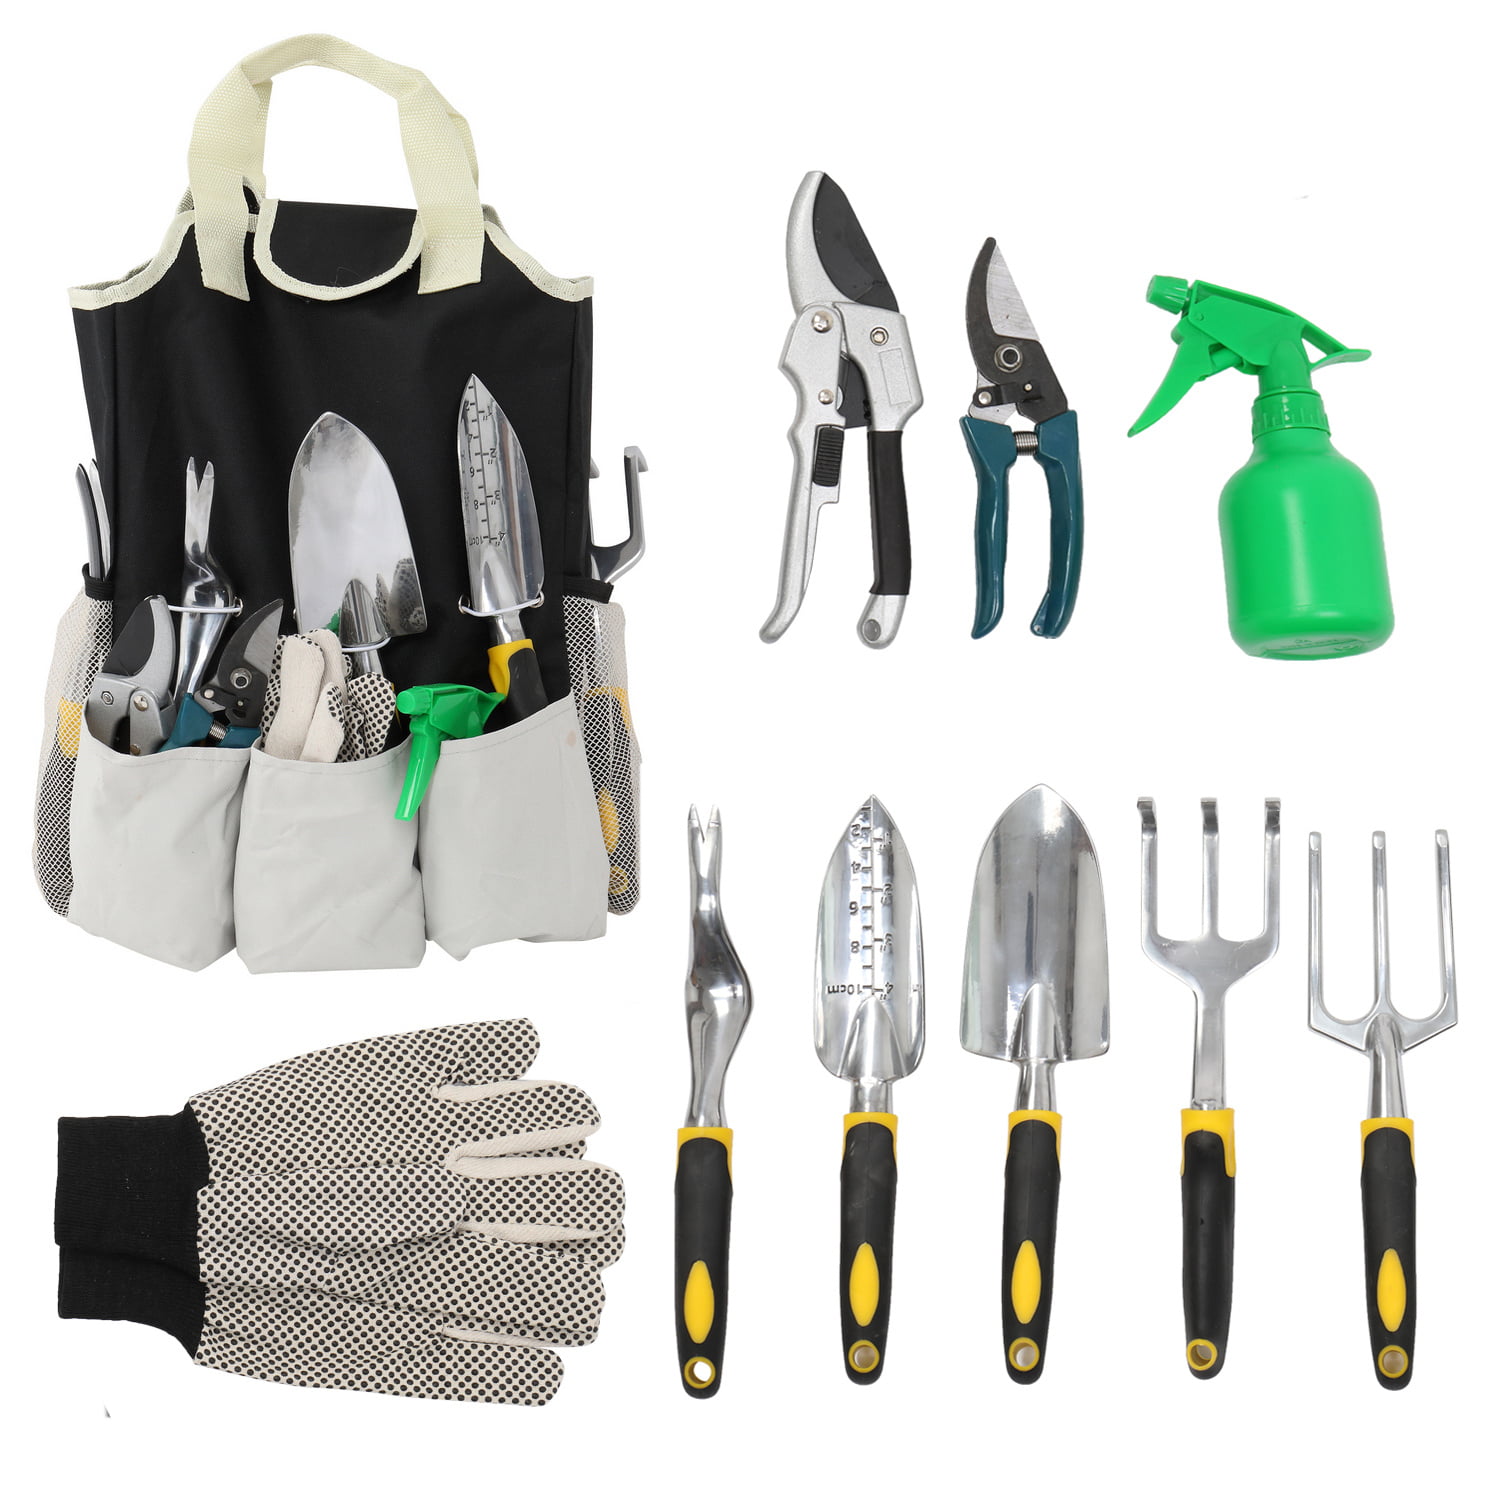 Details about   Gardening Tools Set,14 Pieces Stainless Steel Garden Hand Tool Gardening Gifts 